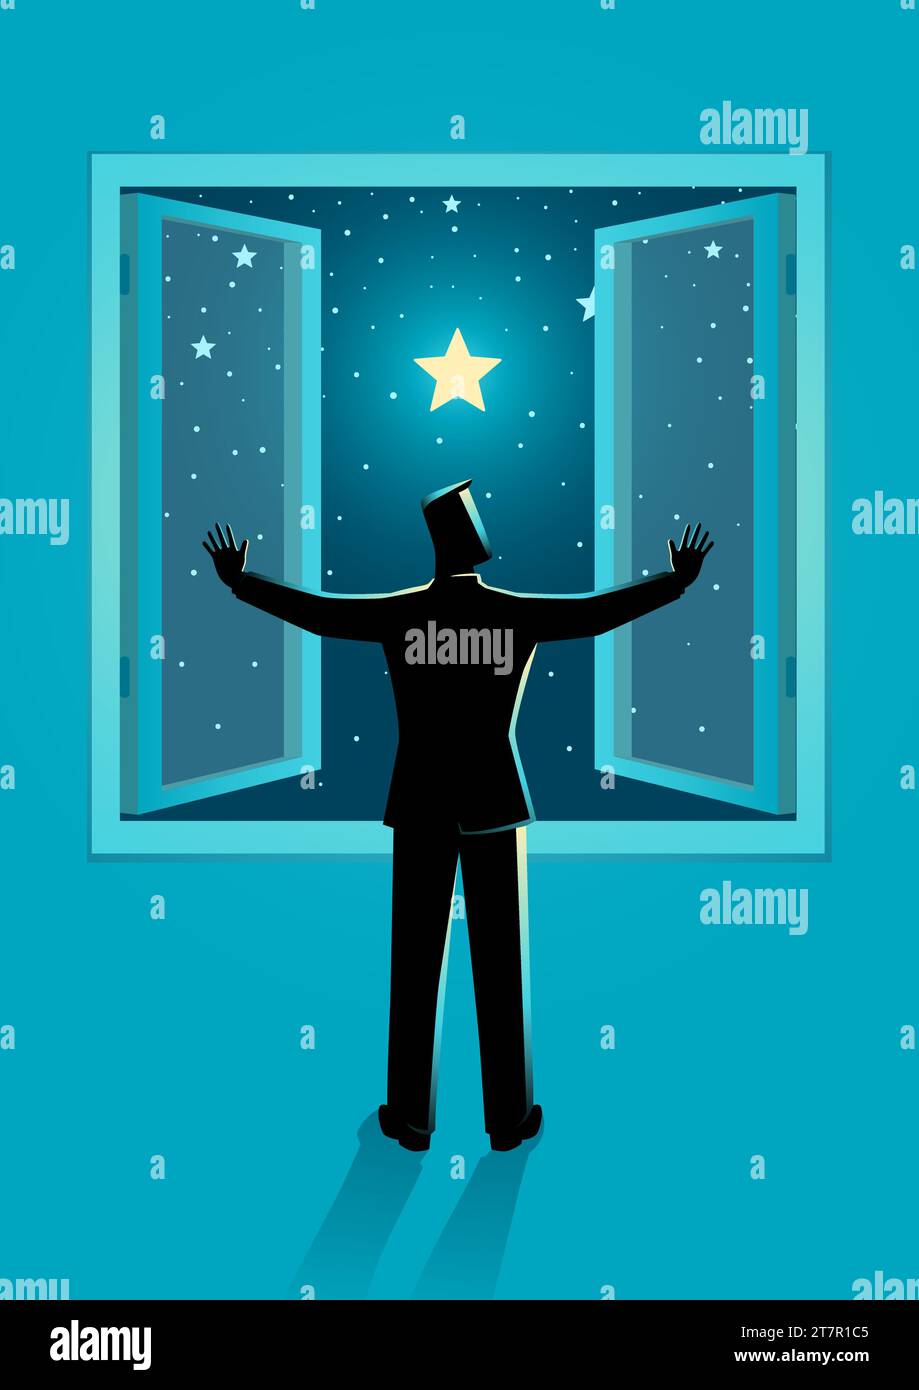 Vector illustration of a man opening the window wide to see clear starry night sky Stock Vector